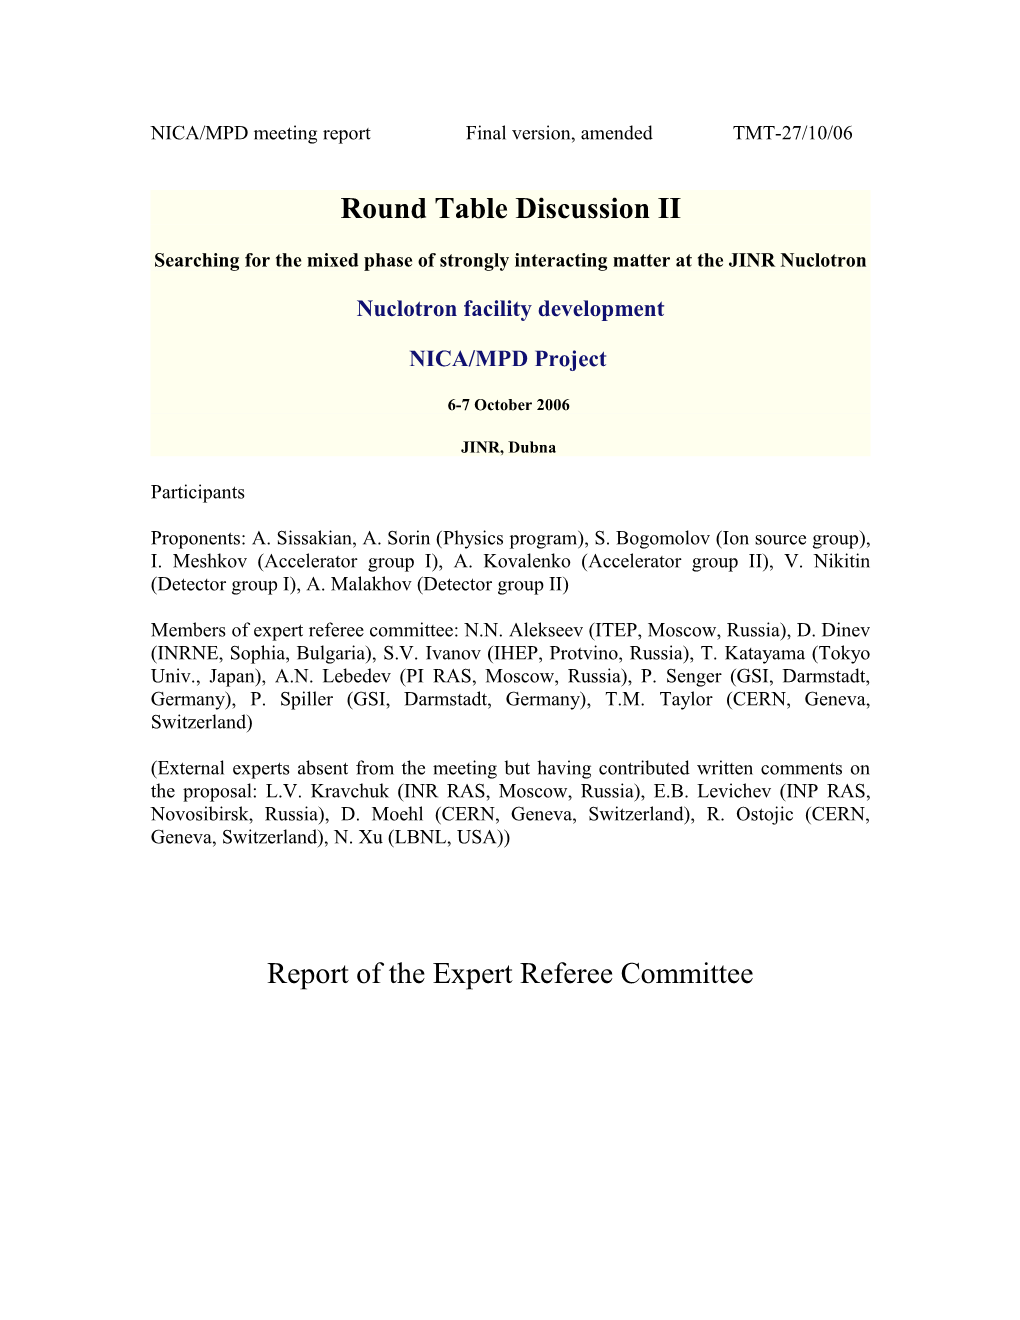 NICA/MPD Meeting Report Finalversion, Amended TMT-27/10/06